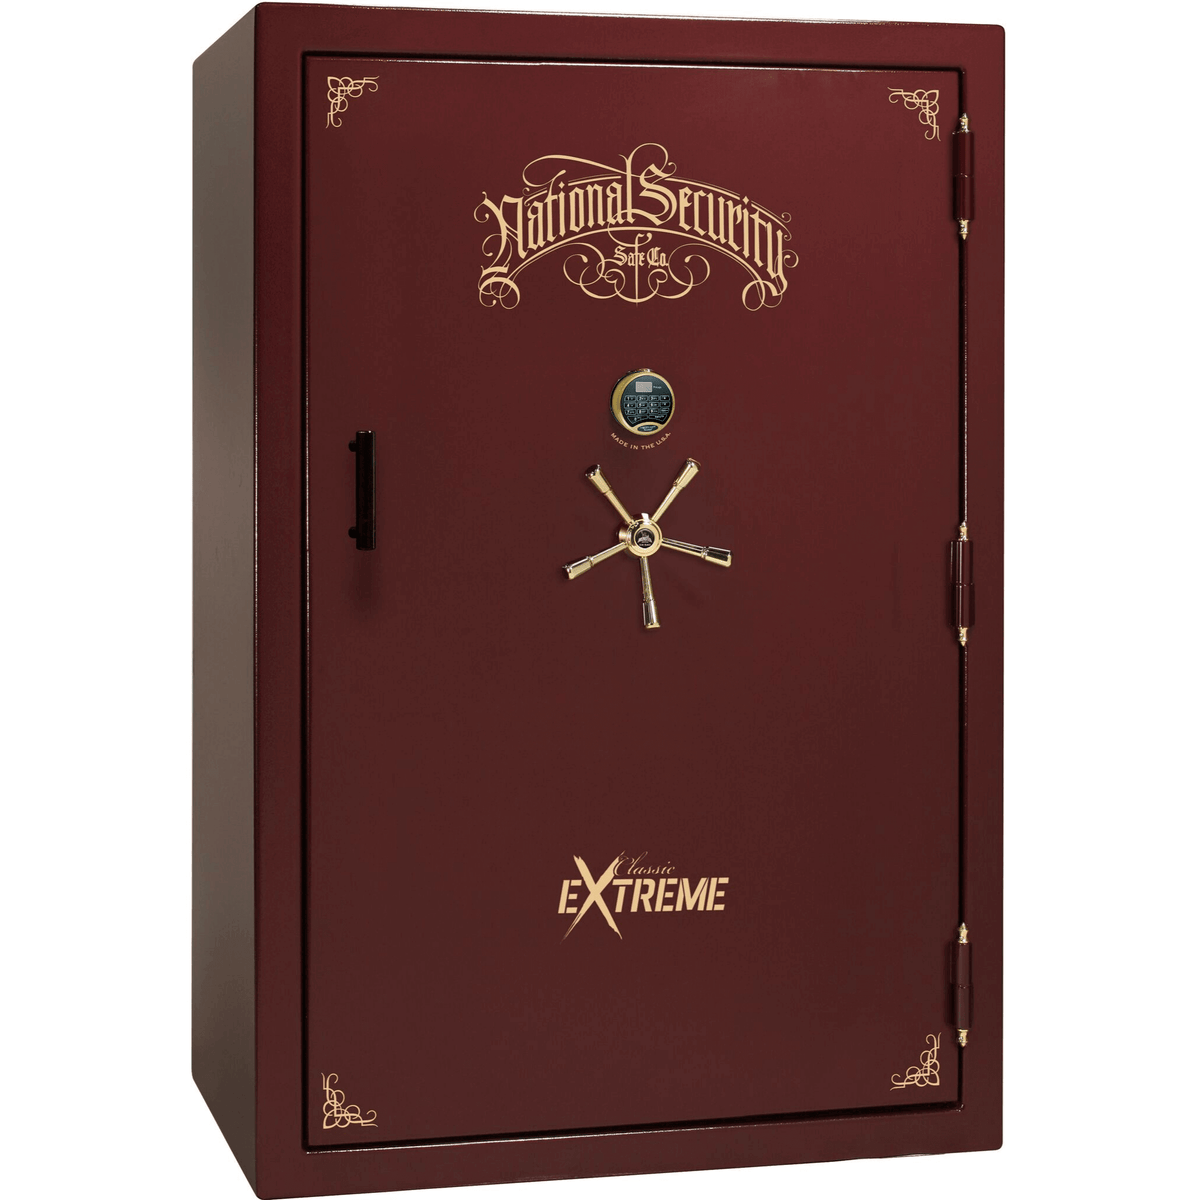 Liberty Classic Select Extreme Wide Body Safe in Burgundy Marble with Brass Electronic Lock.